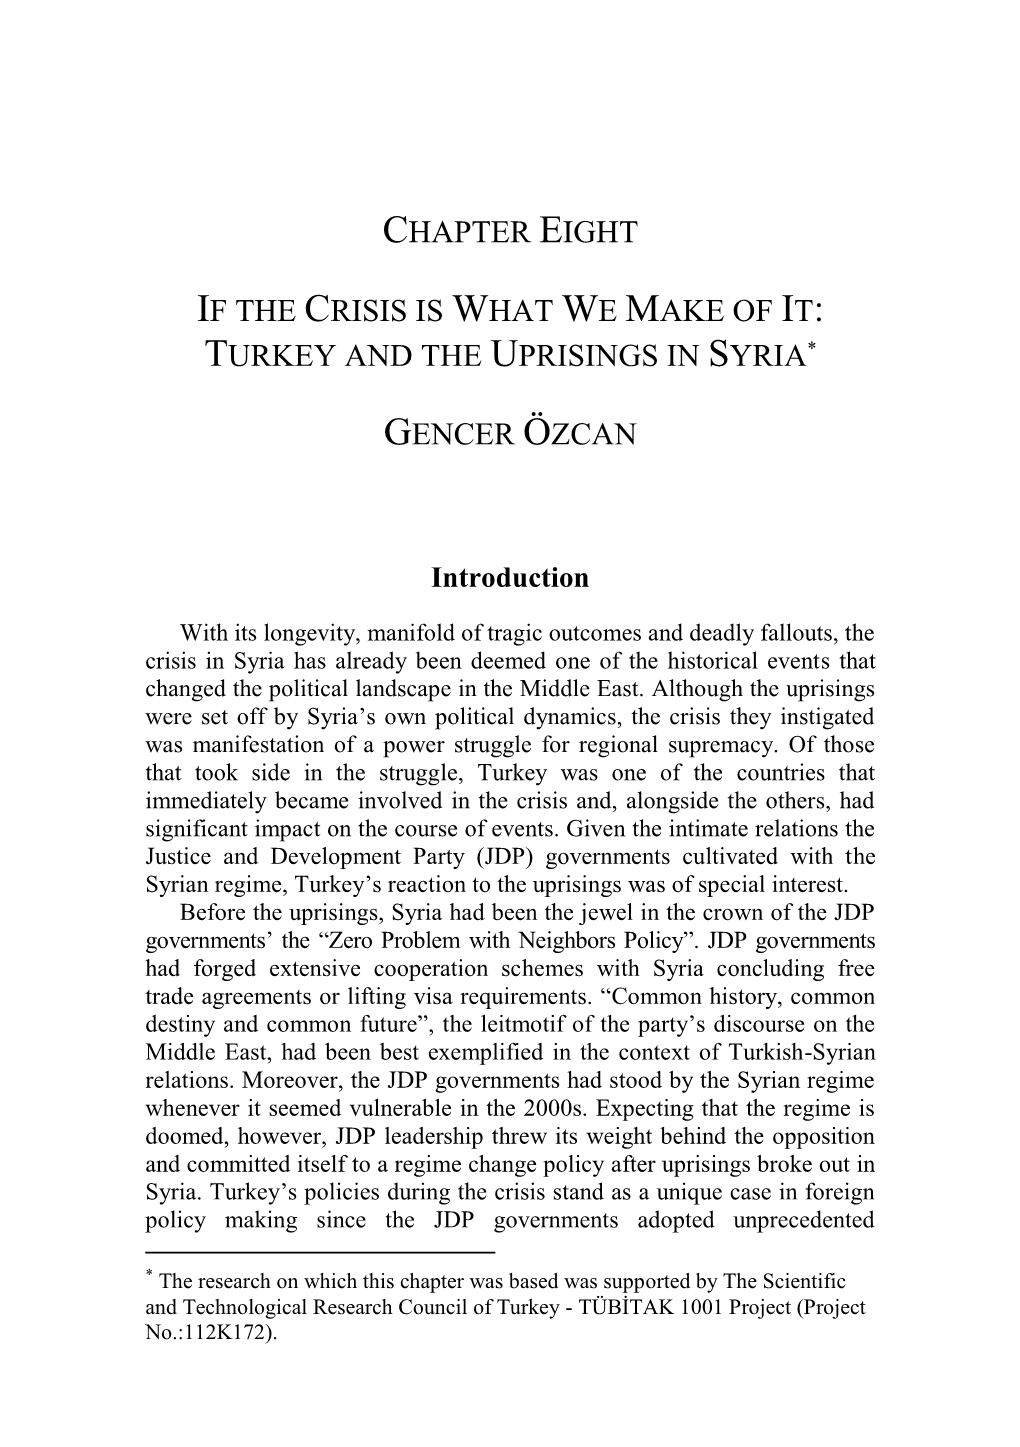 Chapter Eight If the Crisis Is What We Make of It: Turkey